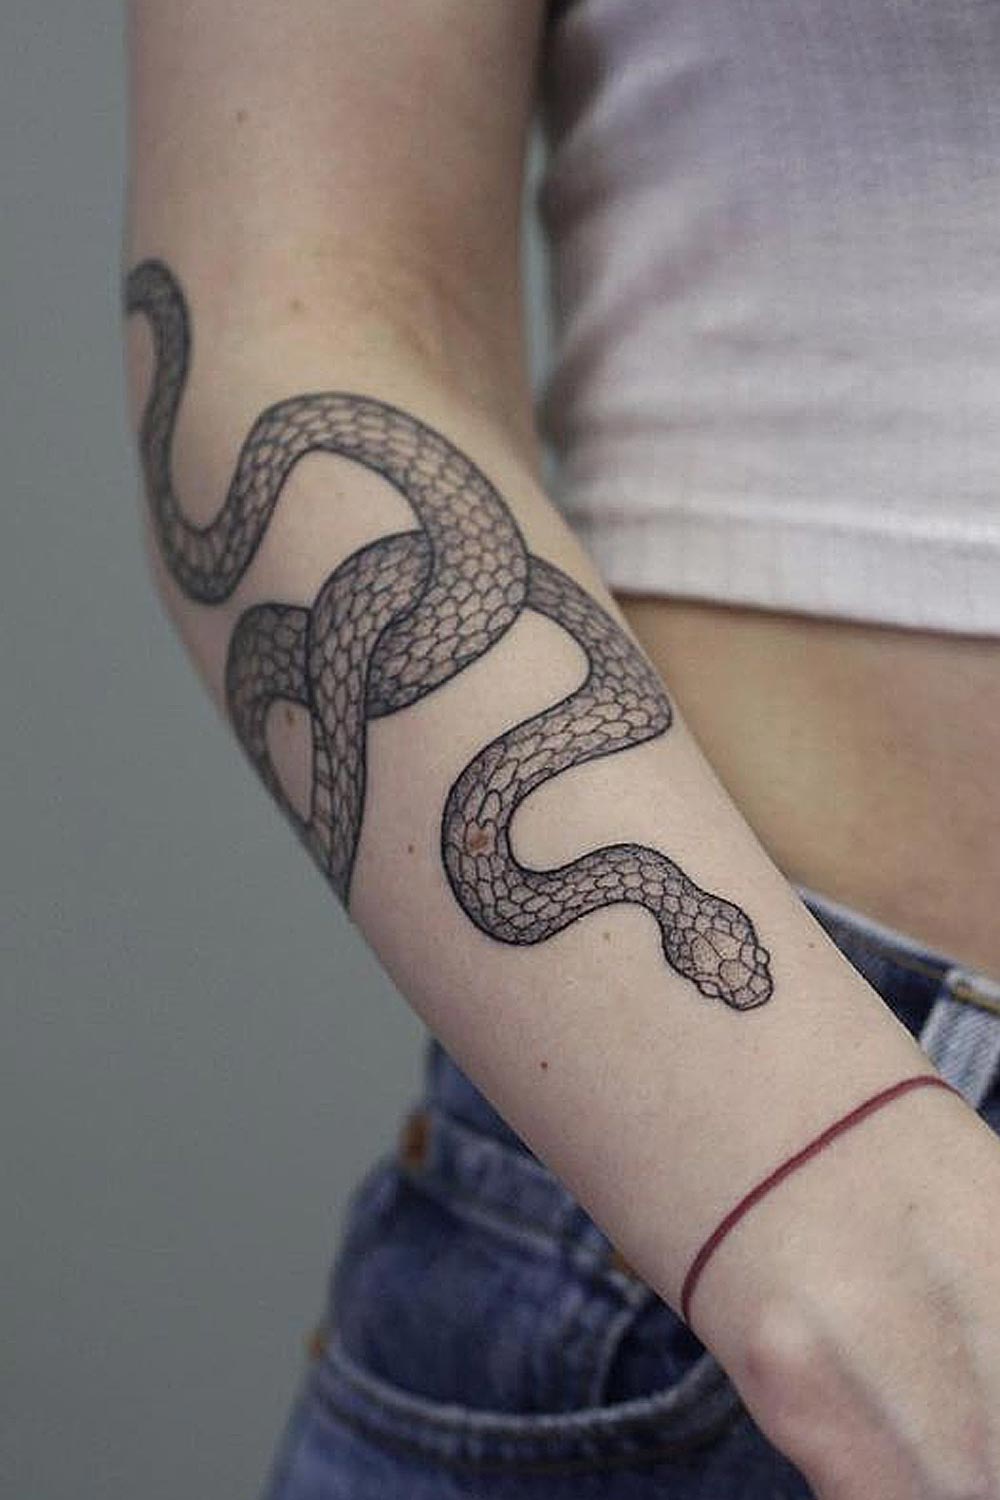 Black and White Snake Tattoo on Hand